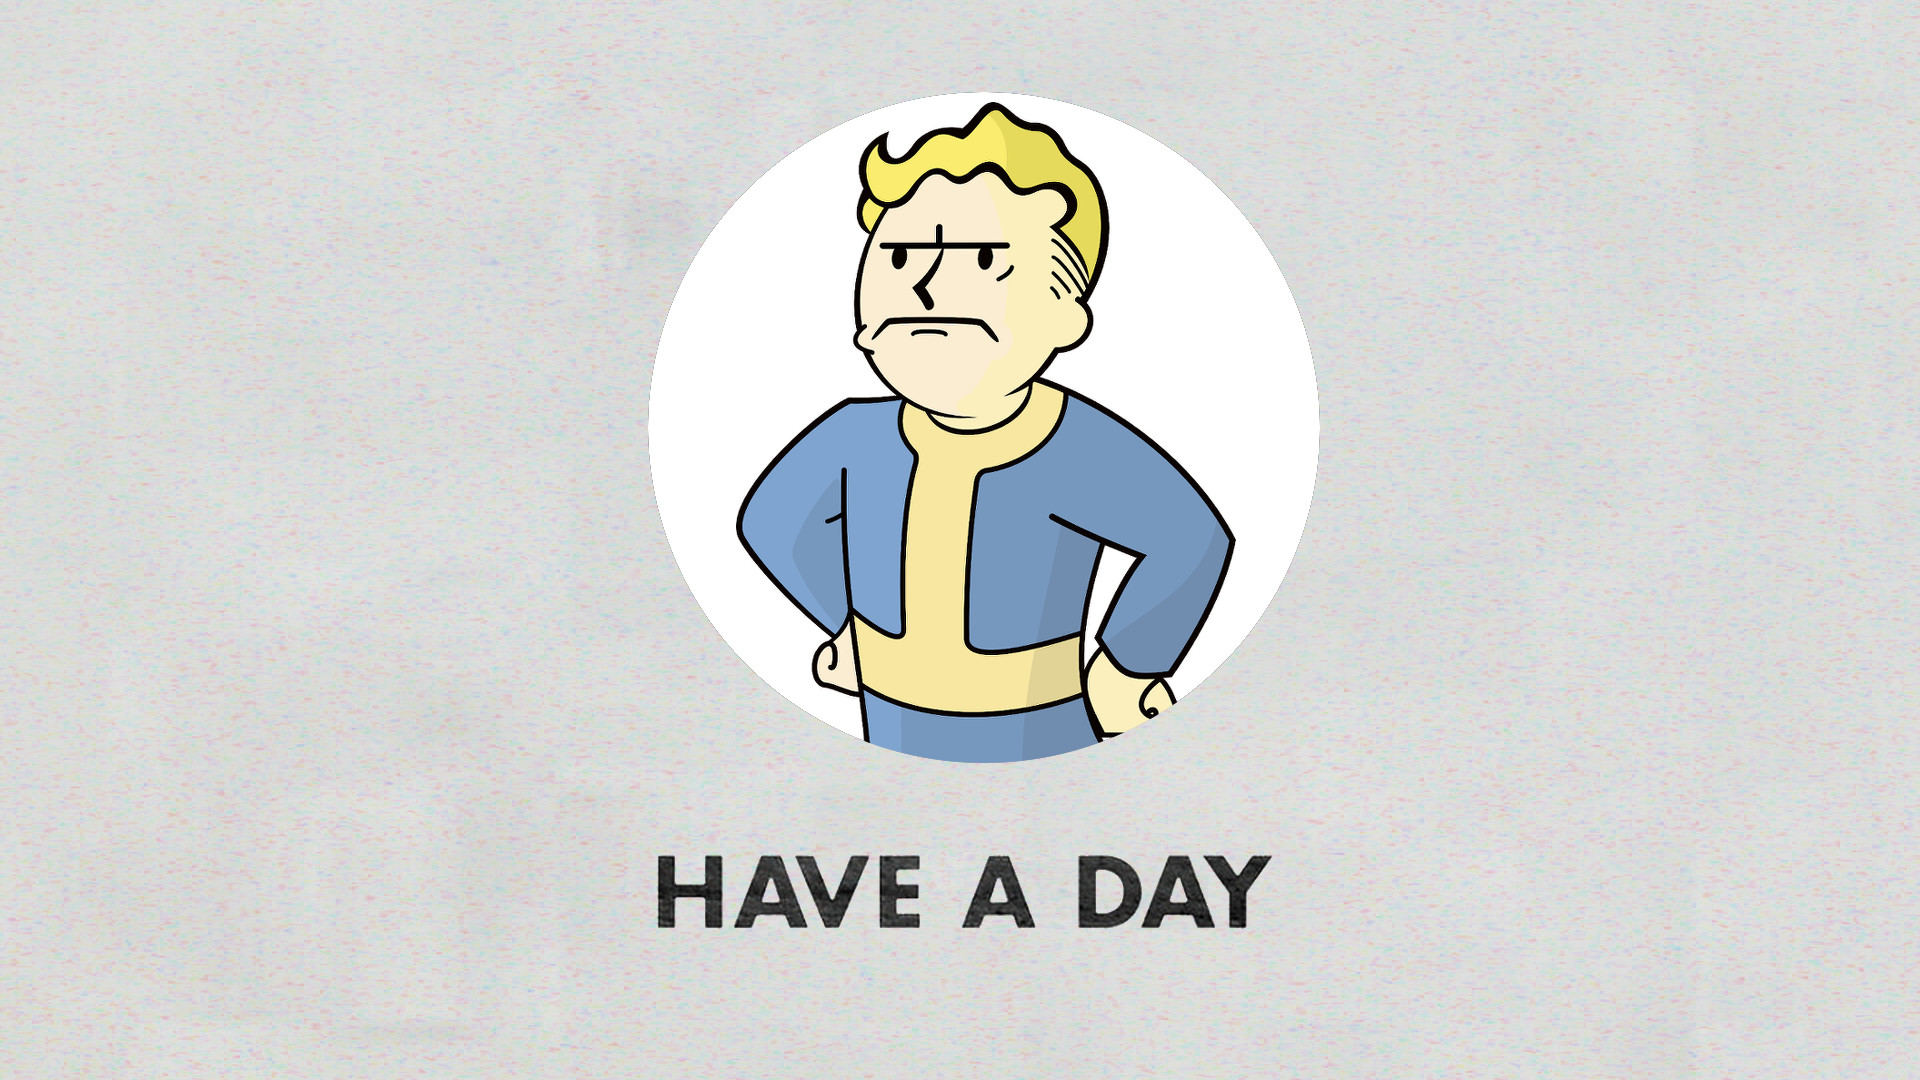 1920x1080 ... Have A Day - Vault Boy From Fallout Remake by VaughnWhiskey